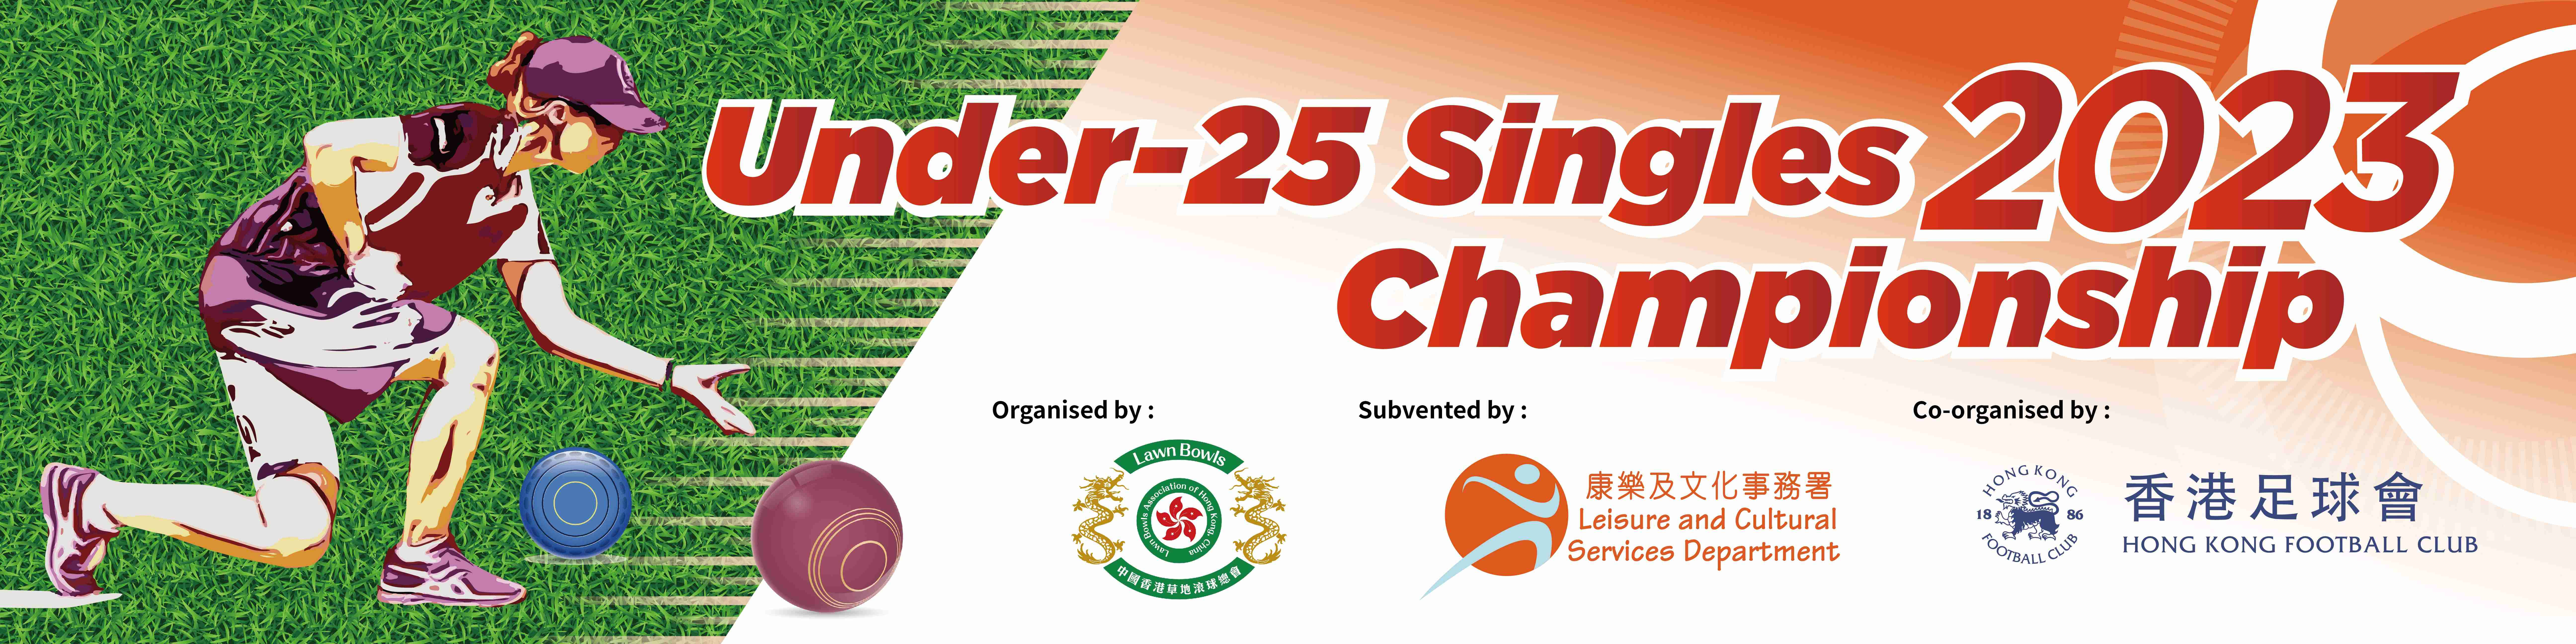 Under-25 Singles Championship 2023 (Updated on 28/11/23)